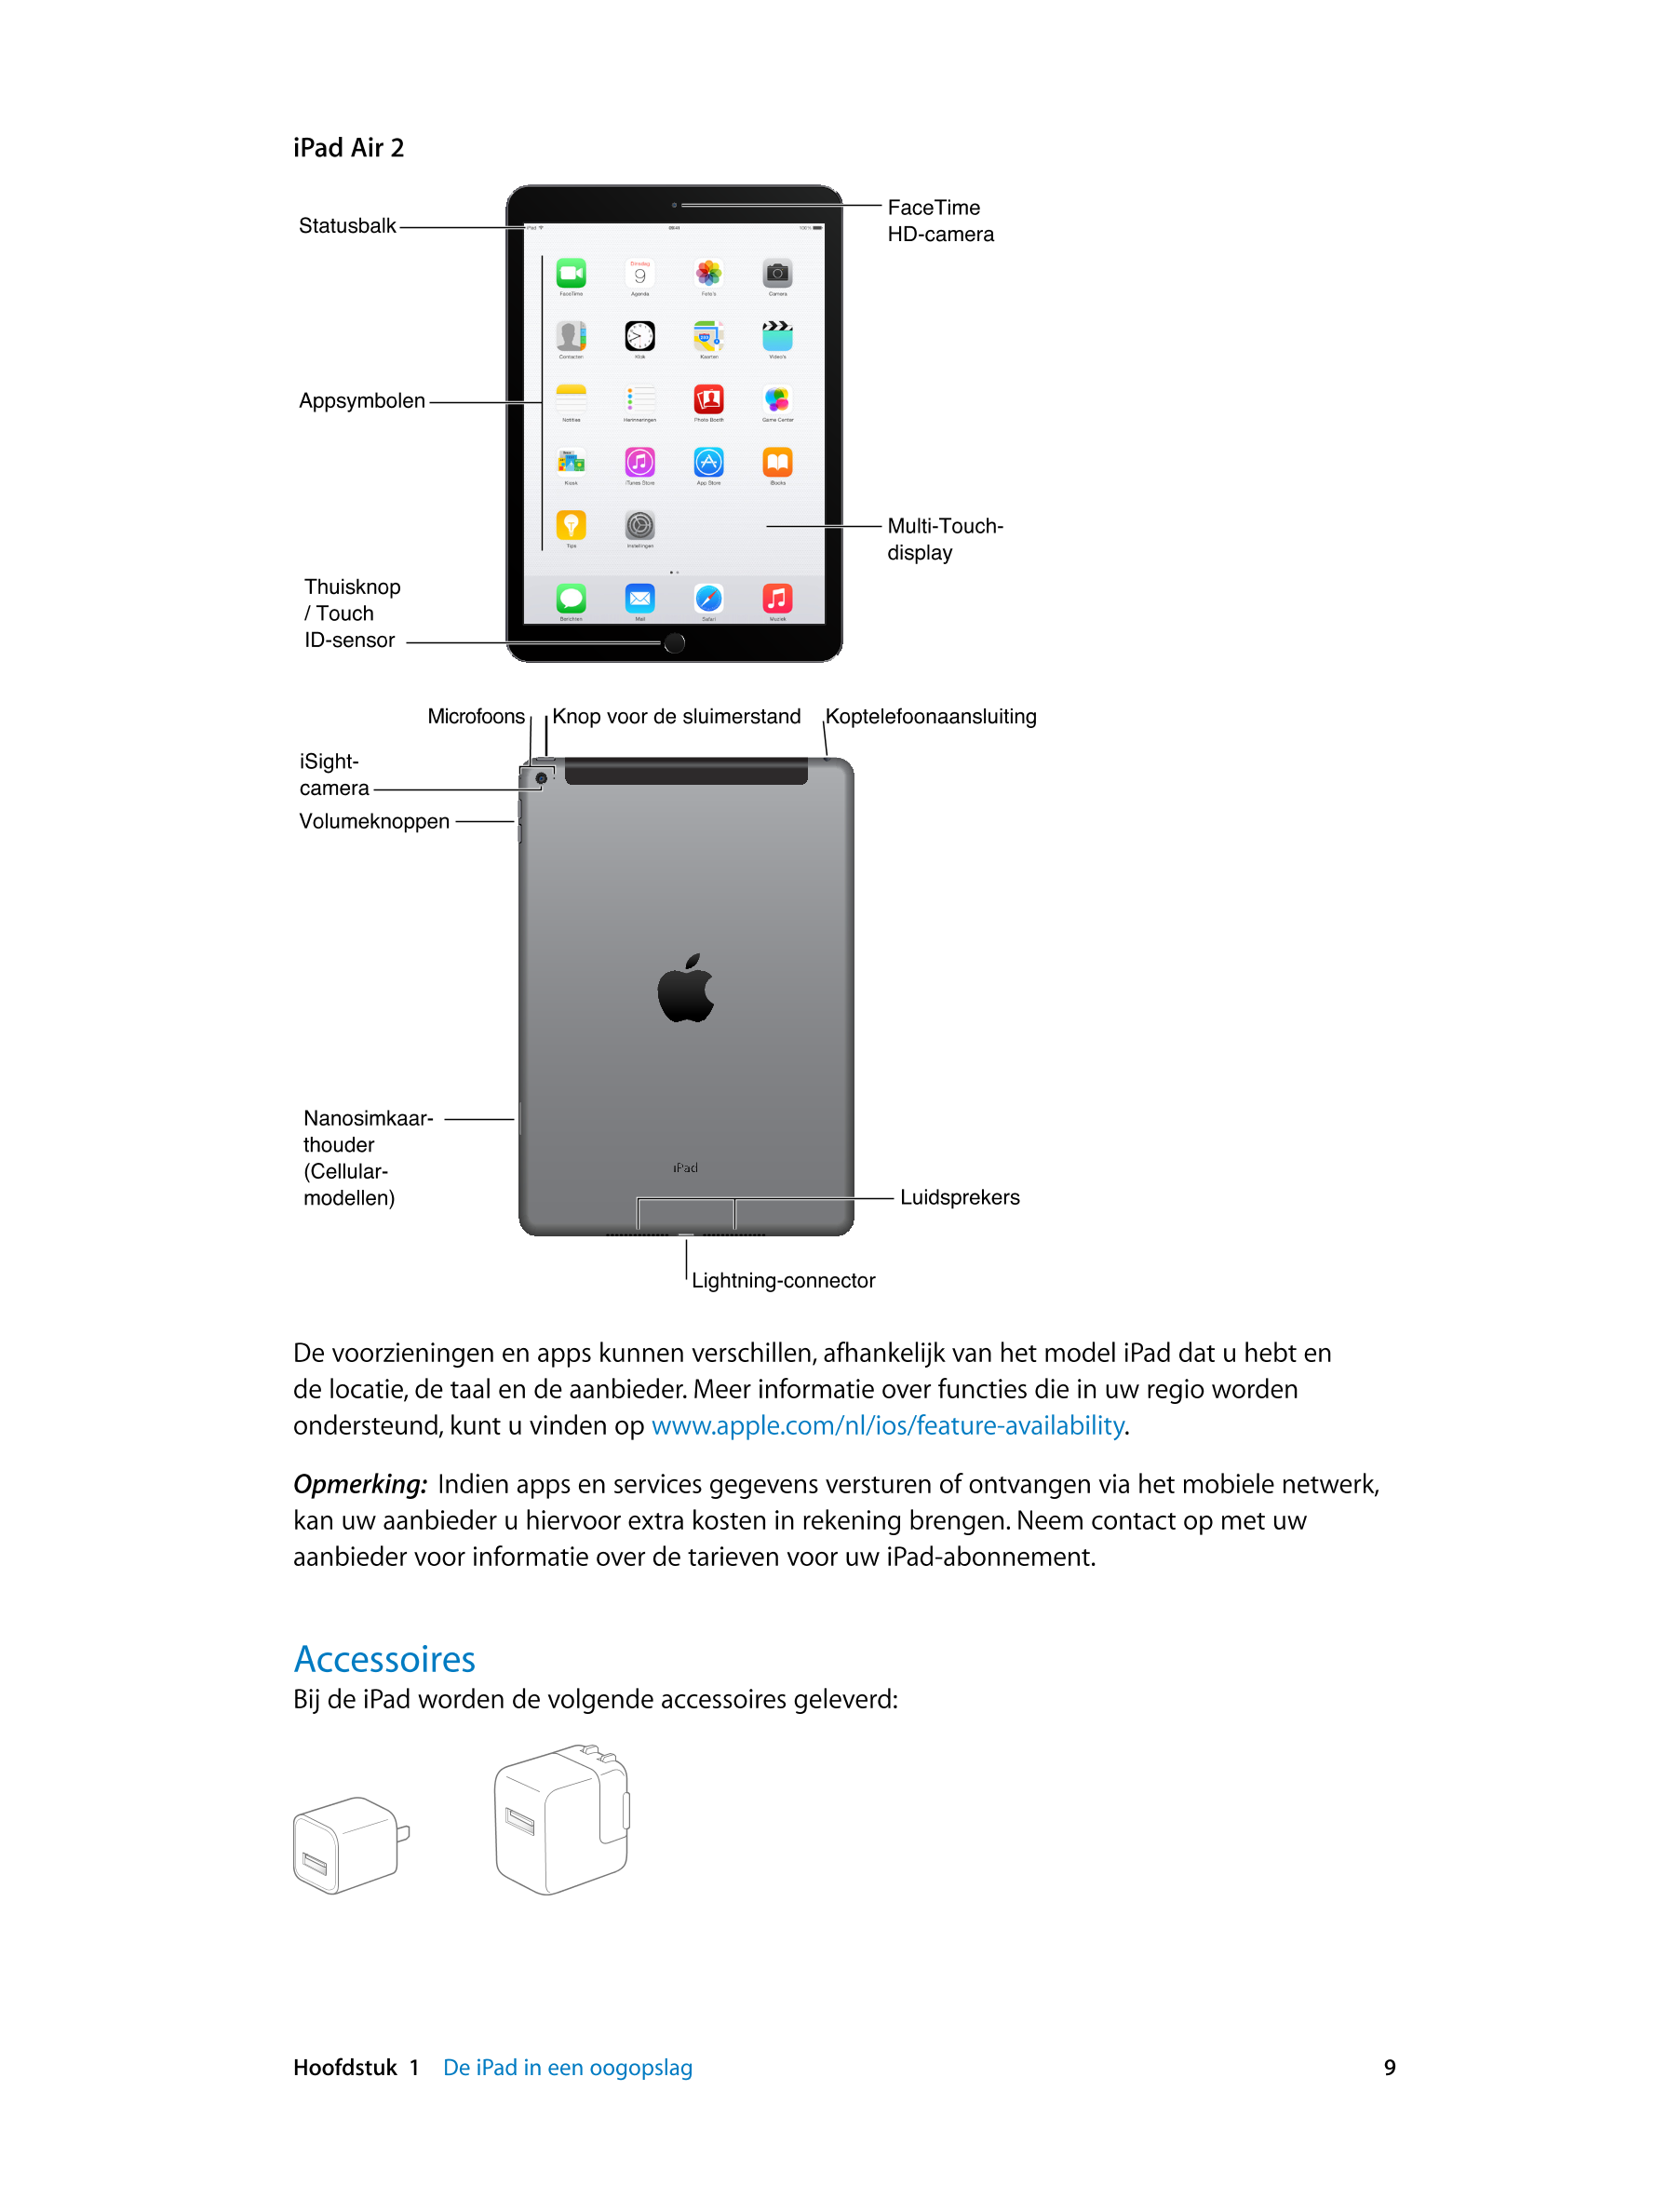 iPad  Air  2
FaceTime 
Statusbalk HD-camera
Appsymbolen
Multi-Touch-
display
Thuisknop
/ Touch 
ID-sensor
Microfoons Knop voor d